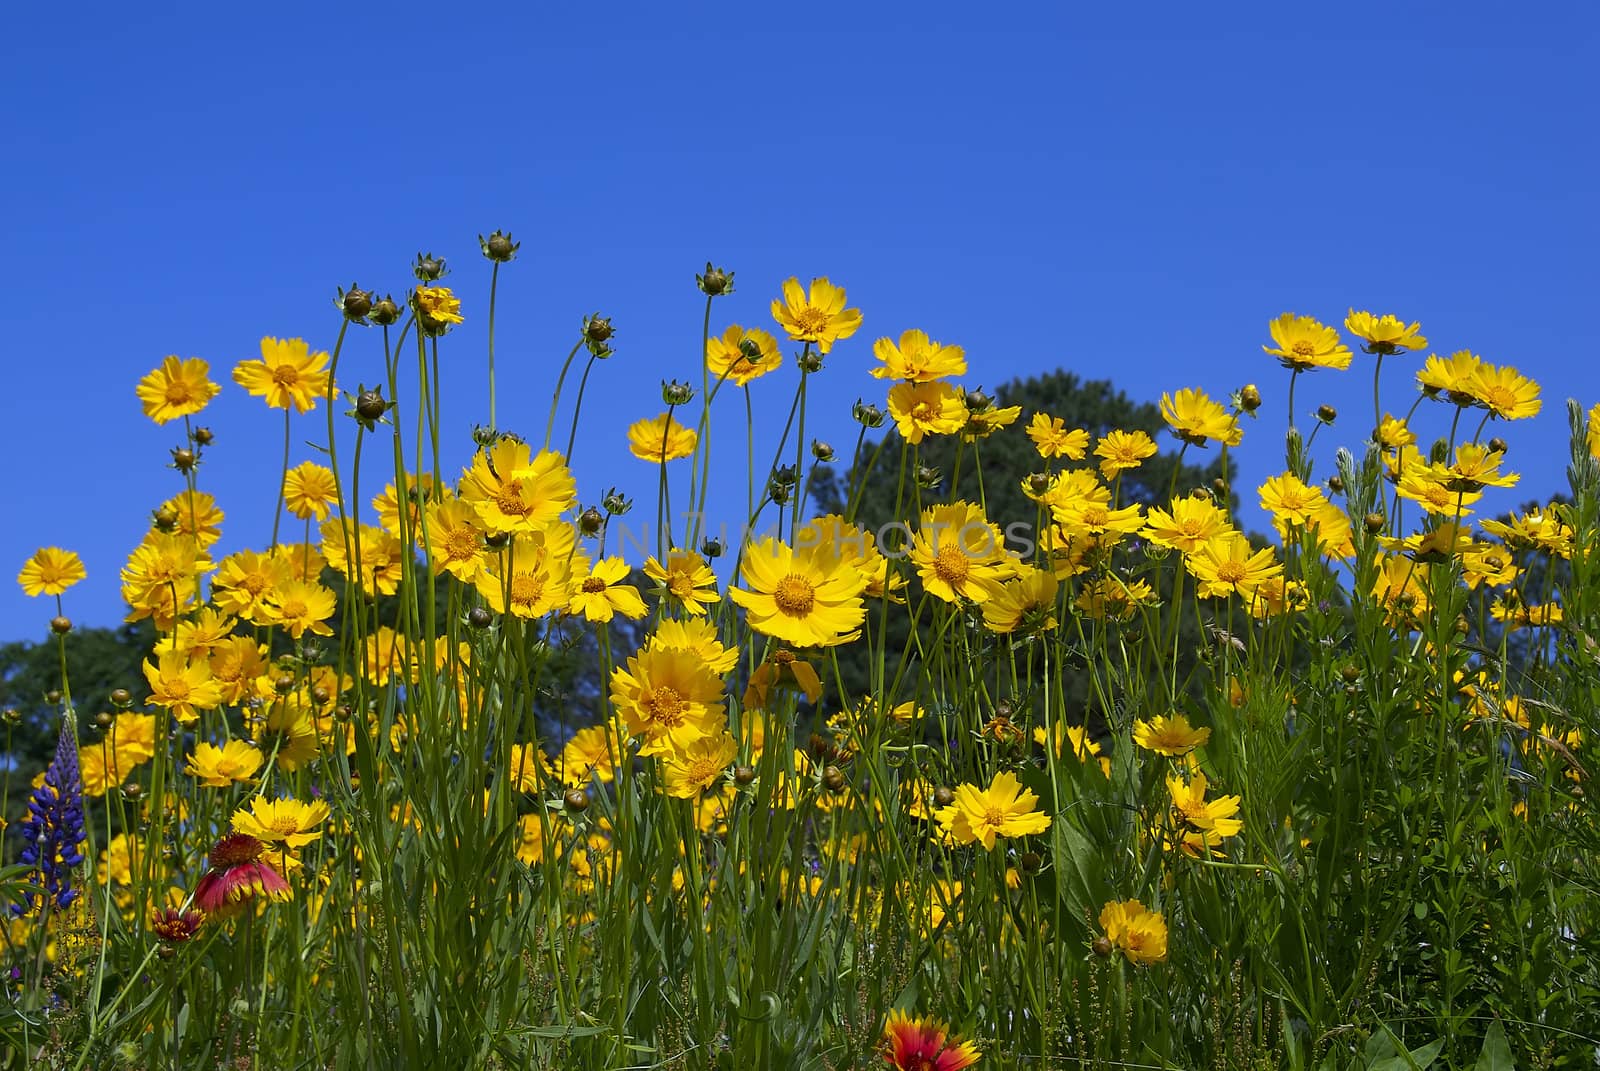 Yellow, purple and red yellow flowers in an open field